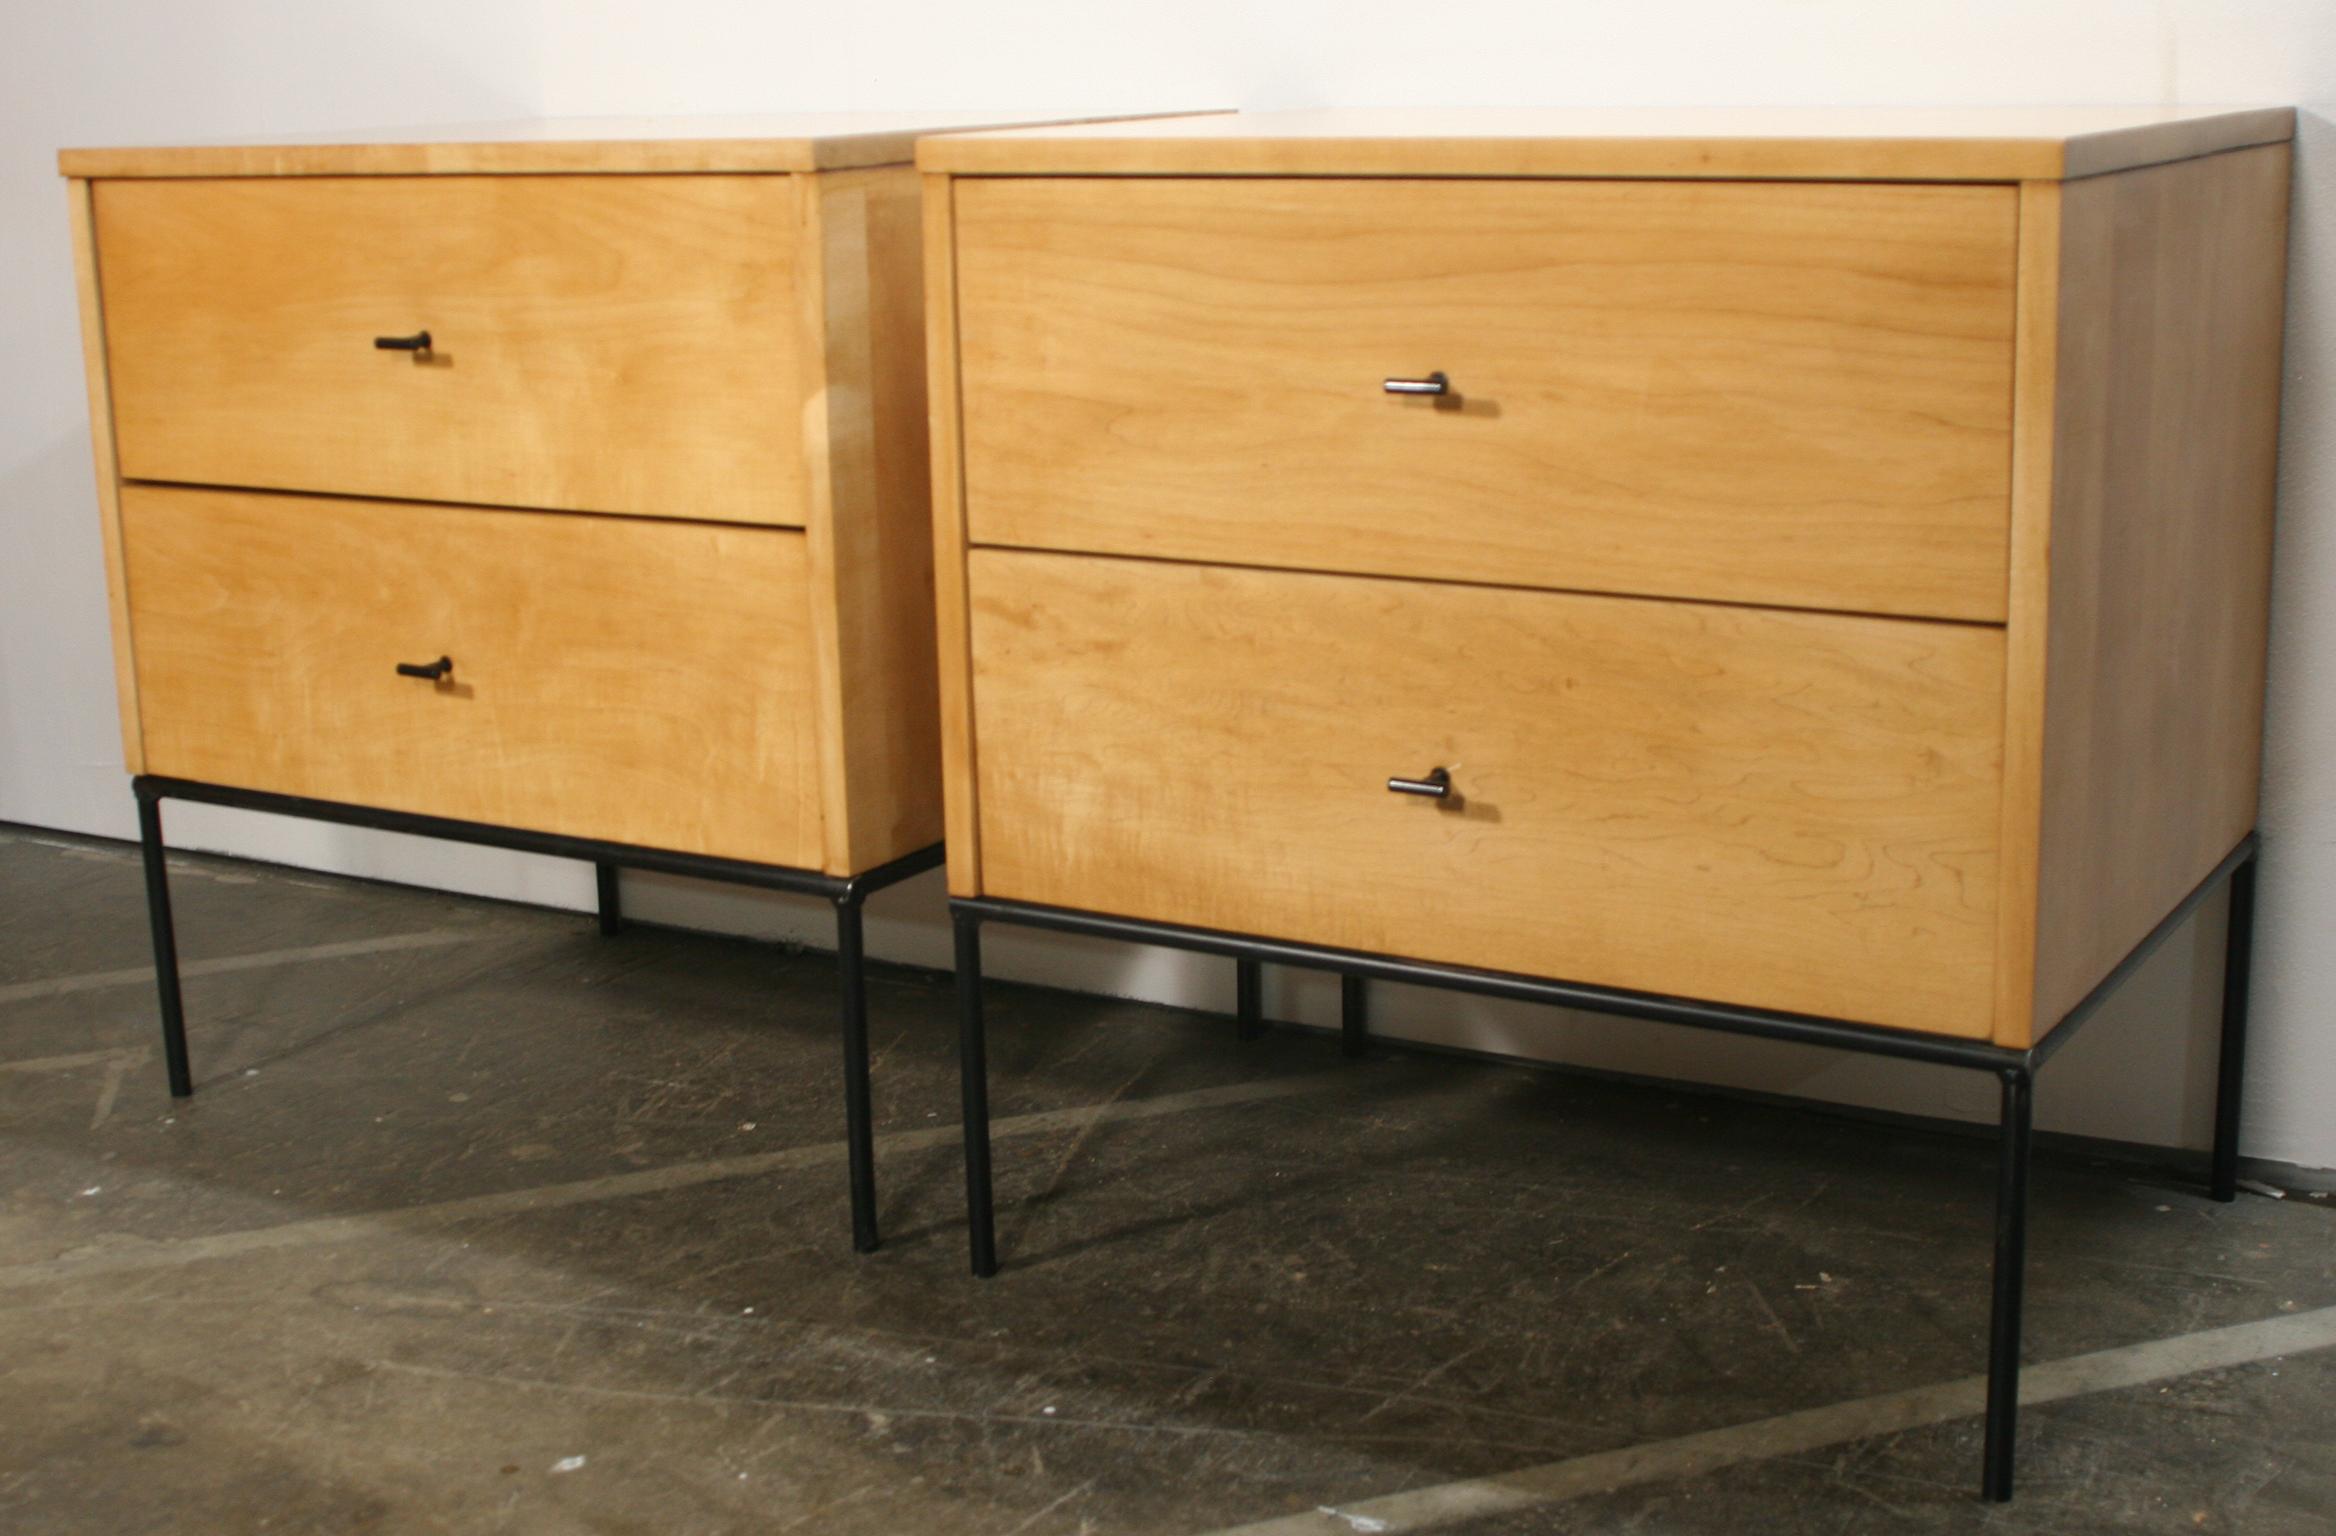 Beautiful pair of Paul McCobb 1950s #1503 blonde maple nightstands end tables double-drawer planner Group. Black steel T pull knobs. Refinished in blonde lacquer. Very modern designed pair of nightstands with iron base with 4 legs. All solid maple.